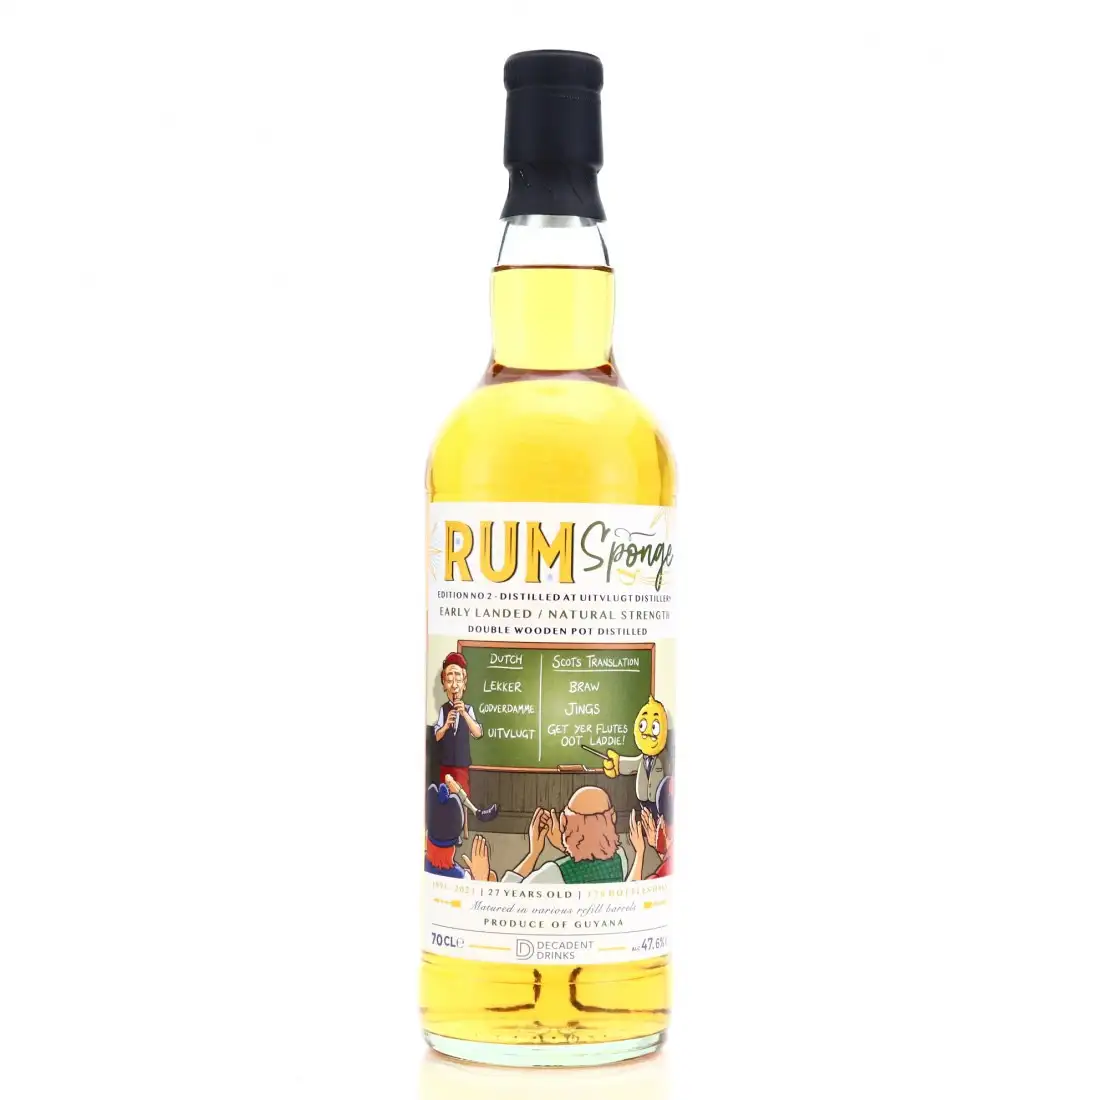 Image of the front of the bottle of the rum Rum Sponge